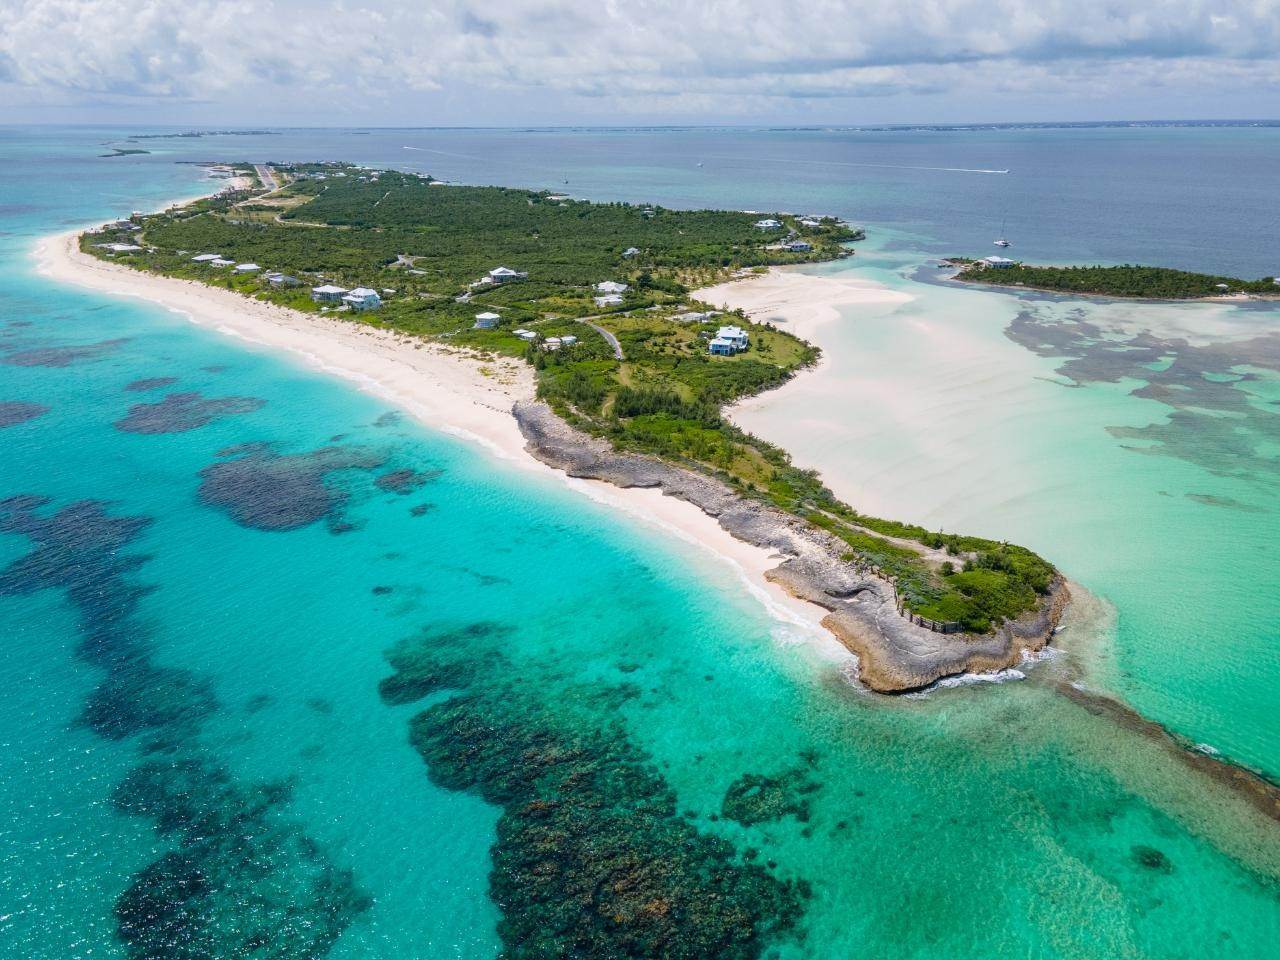 Property for Sale at Scotland Cay, Abaco, Bahamas